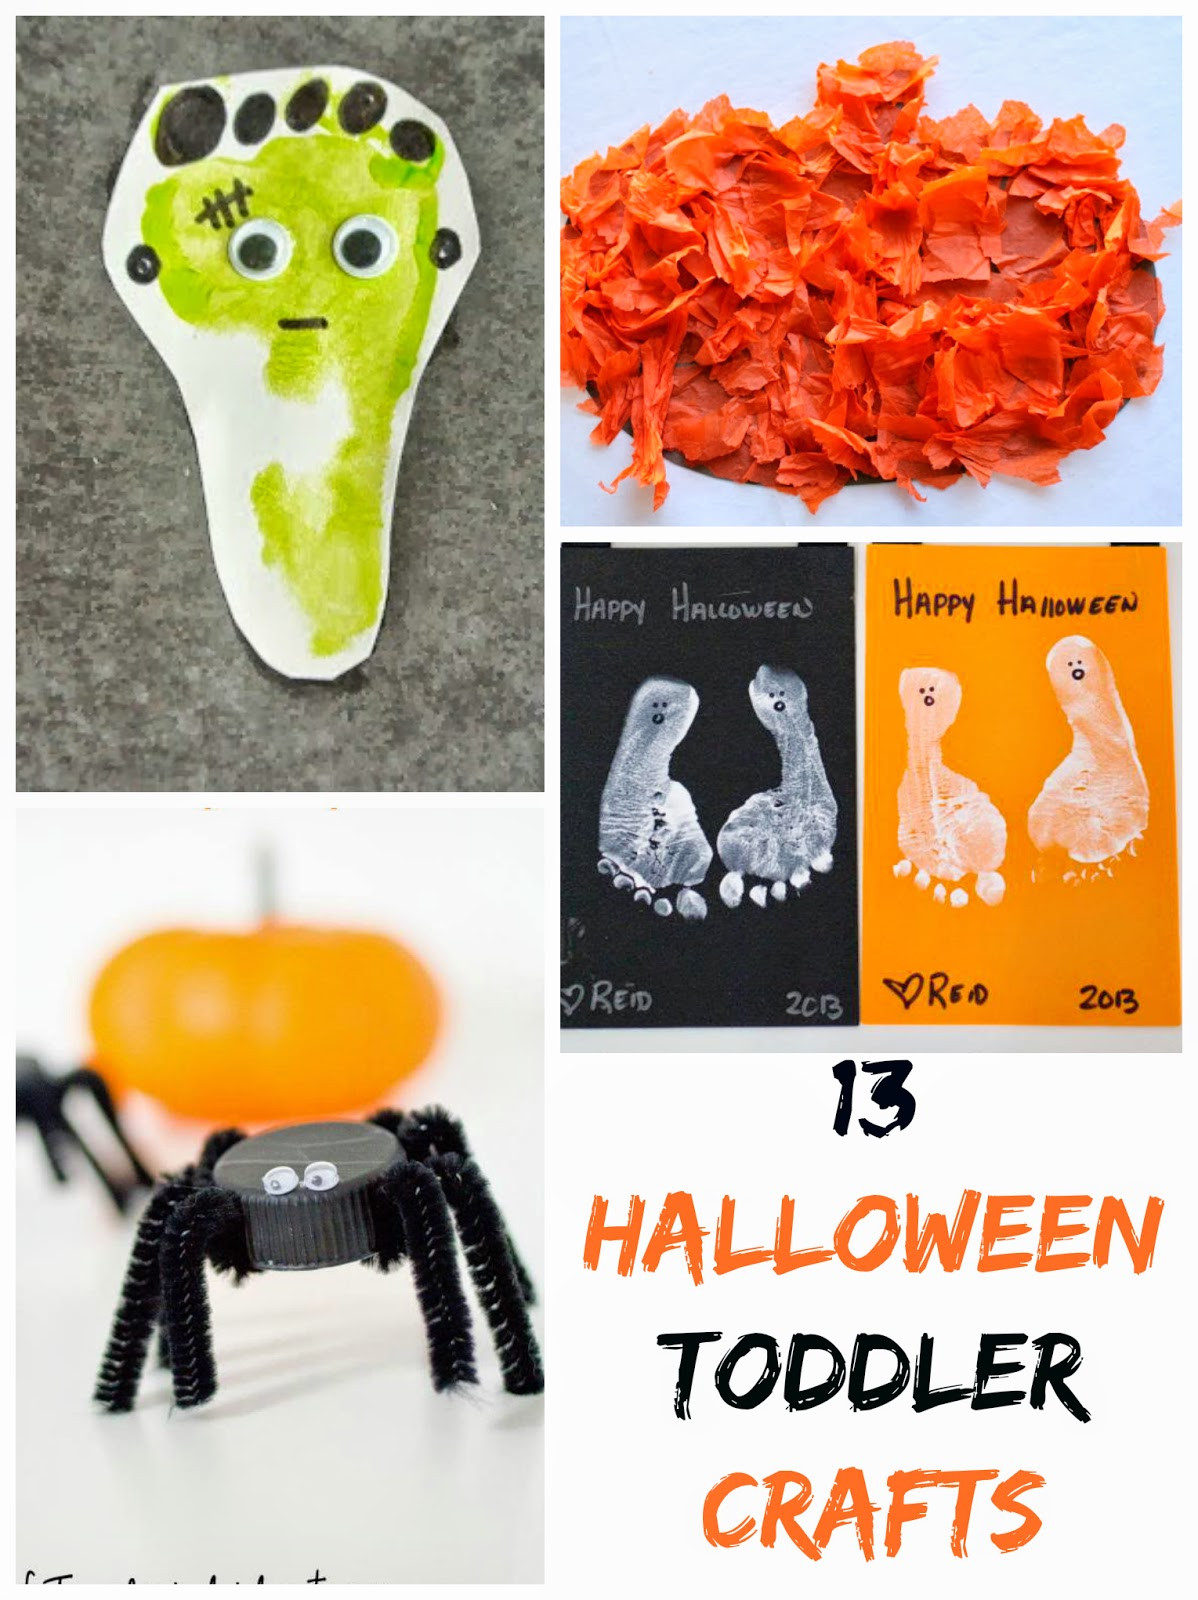 Halloween Toddler Crafts
 My Life of Travels and Adventures 13 Halloween Toddler